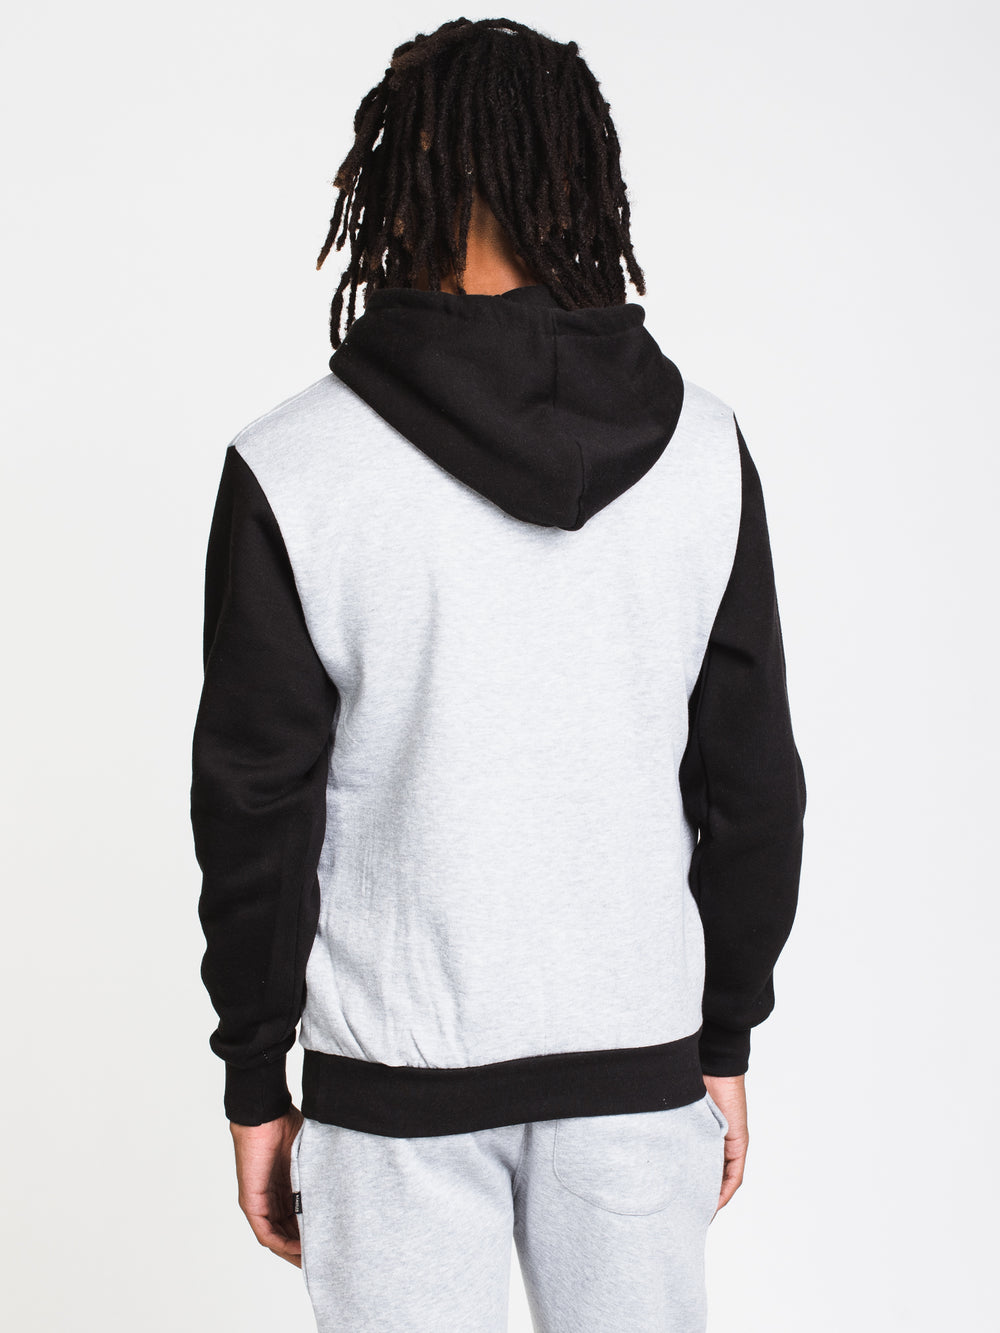 CROOKS & CASTLES REVERSE LOGO PULLOVER HOODIE - CLEARANCE